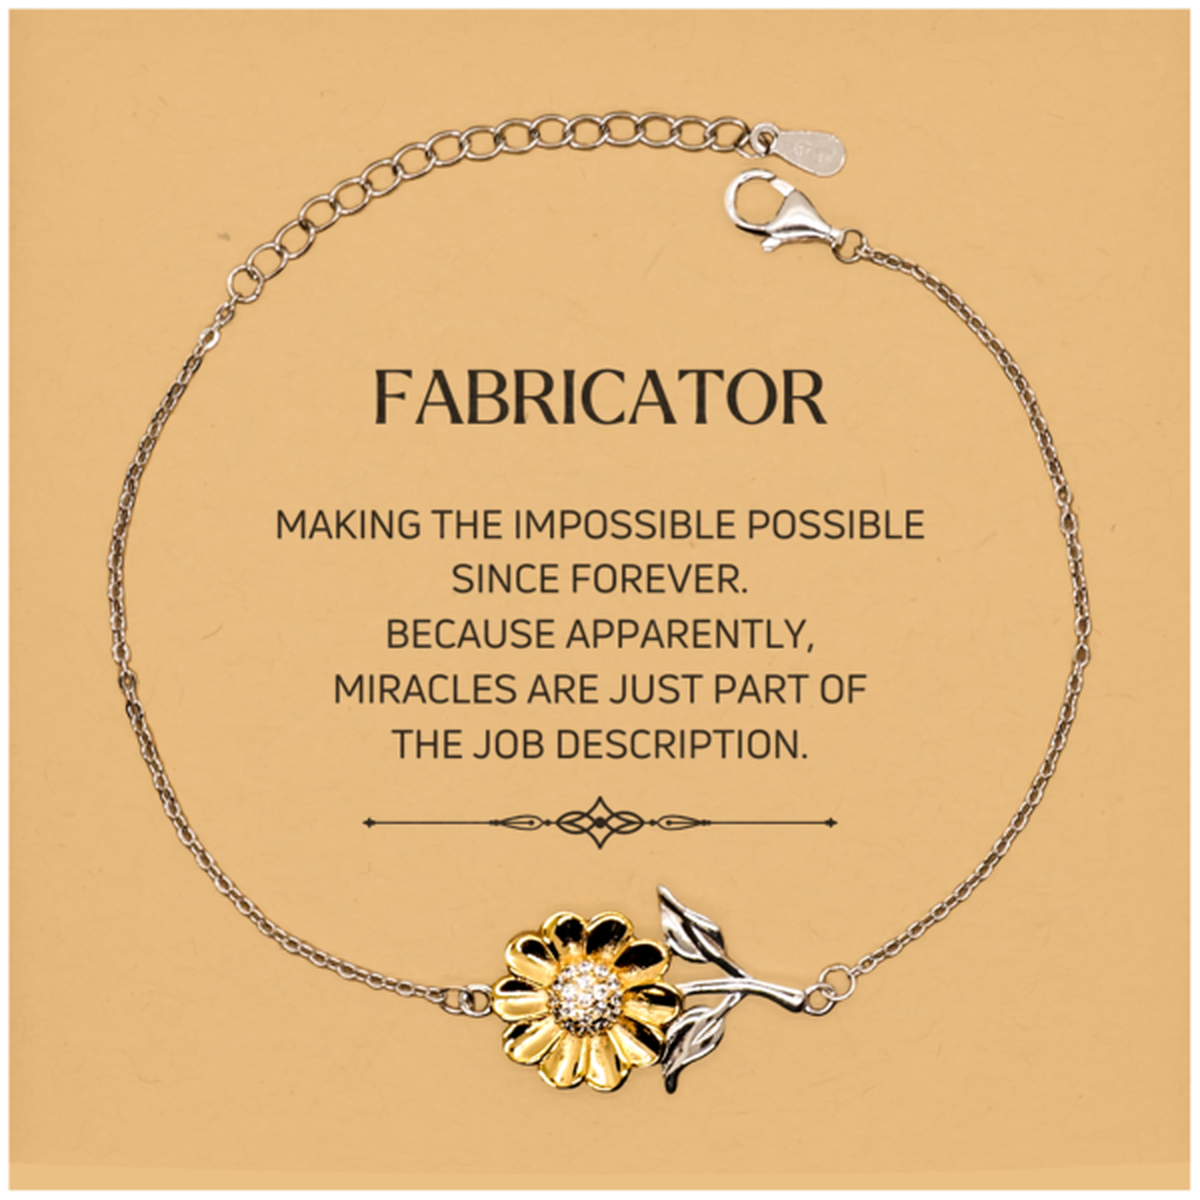 Funny Fabricator Gifts, Miracles are just part of the job description, Inspirational Birthday Christmas Sunflower Bracelet For Fabricator, Men, Women, Coworkers, Friends, Boss